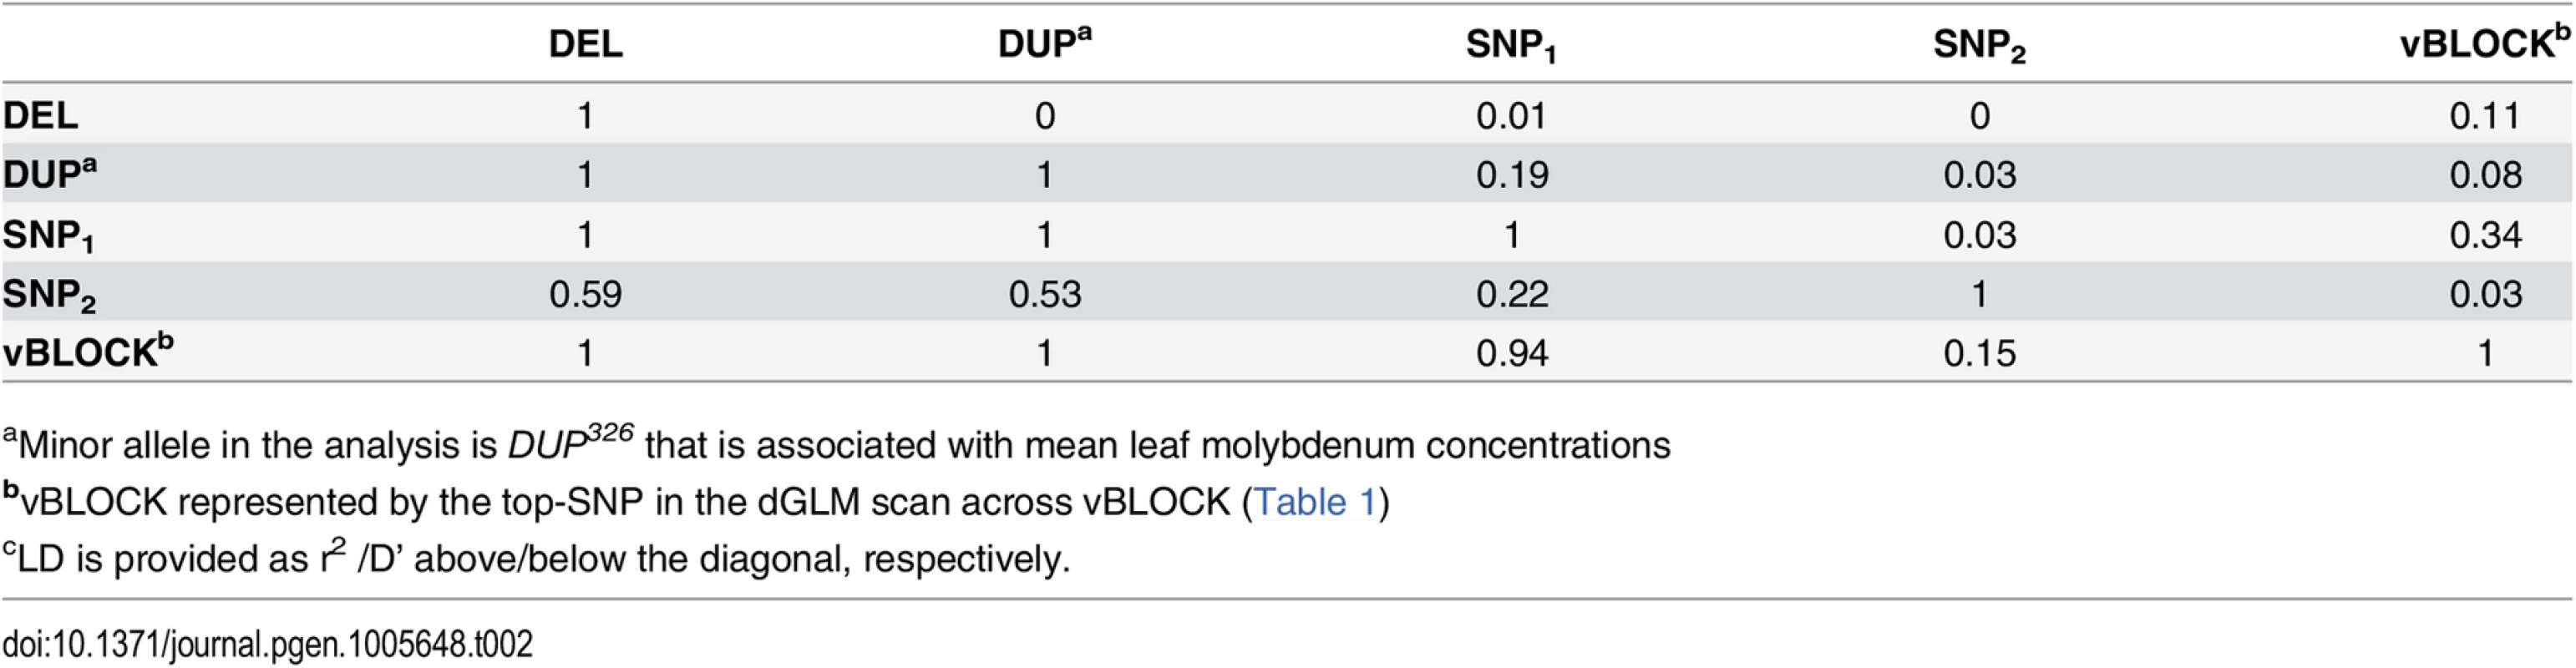 LD<em class=&quot;ref&quot;><sup>c</sup></em> between the loci altering mean leaf molybdenum concentrations.